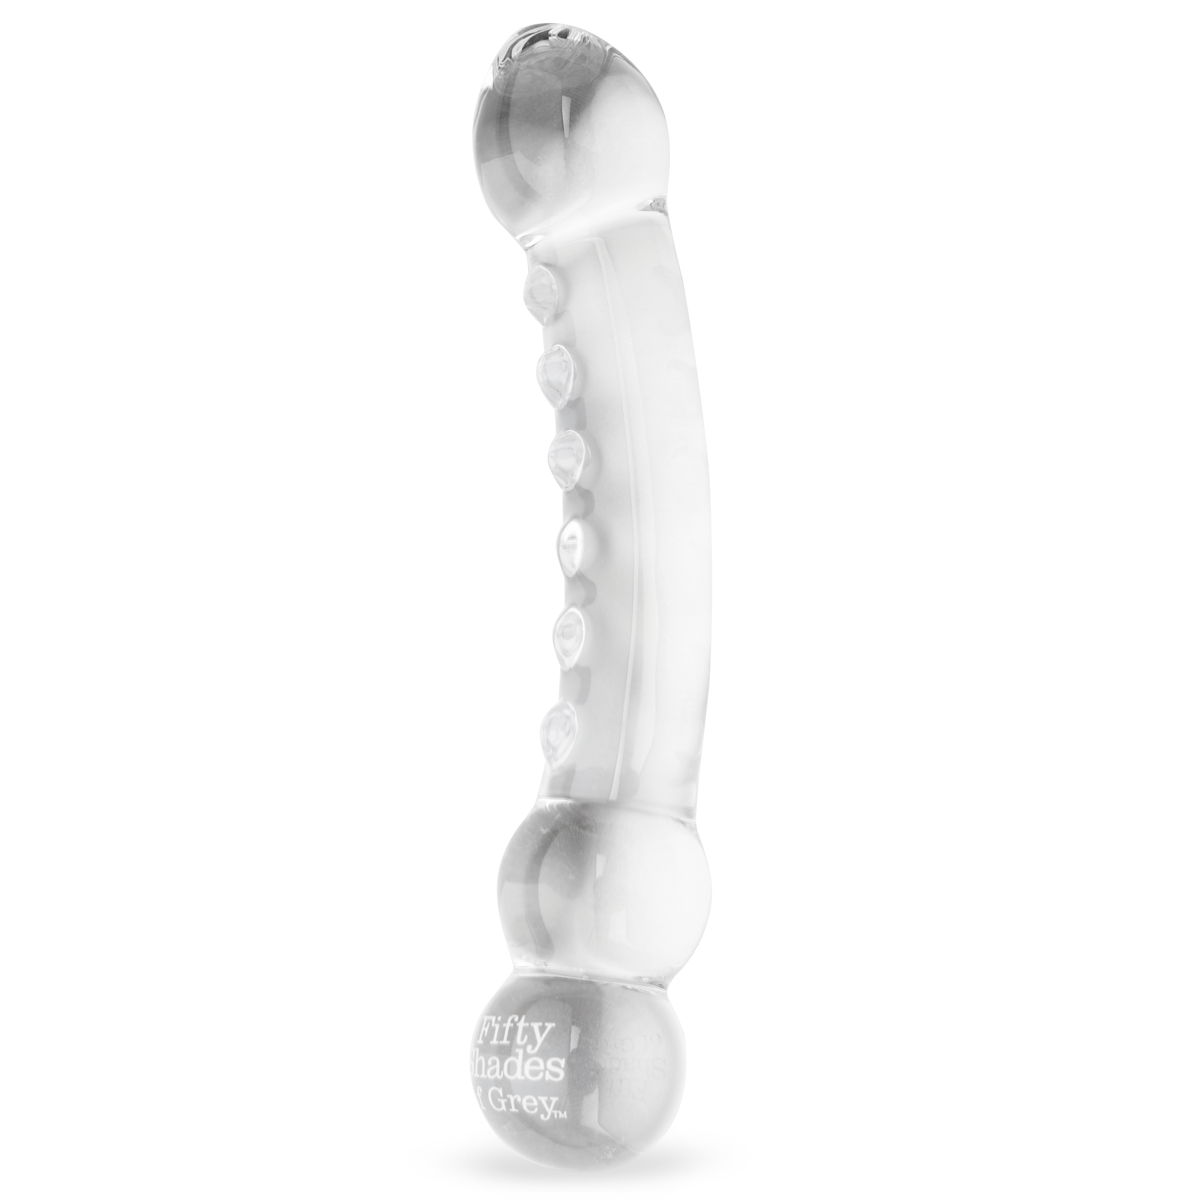 Dildo in vetro Drive me Crazy Fifty Shades of Grey